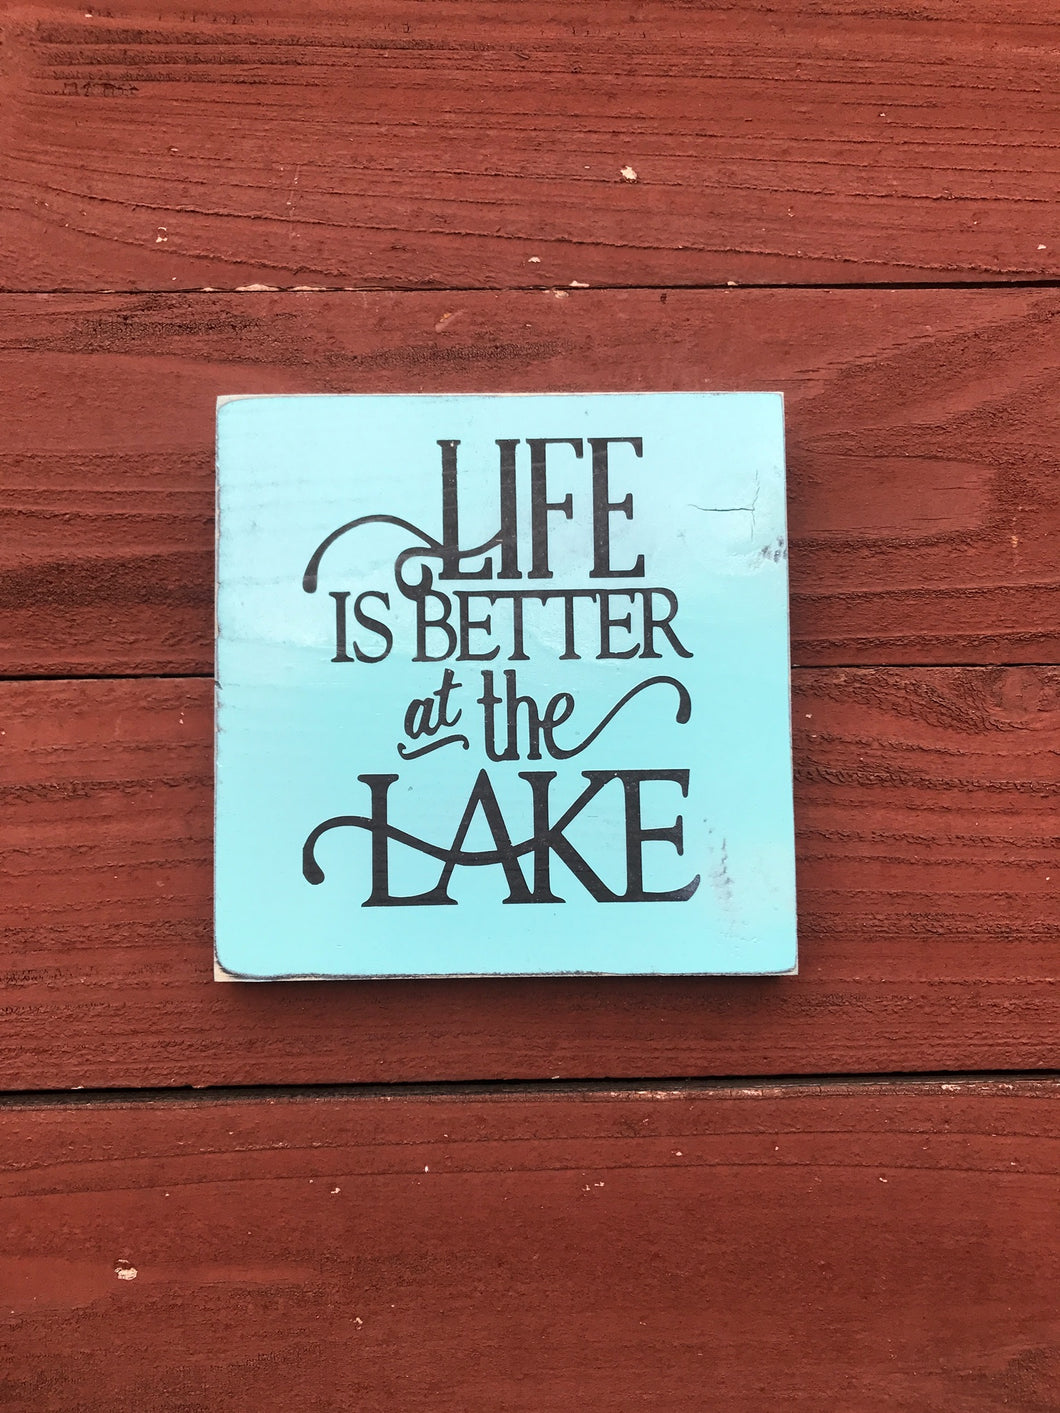 Life is better at the lake sign - Lake sign - Lake house sign - Wood sign - Rustic sign - Summer time sign - Beach house sign - Knot In Your House